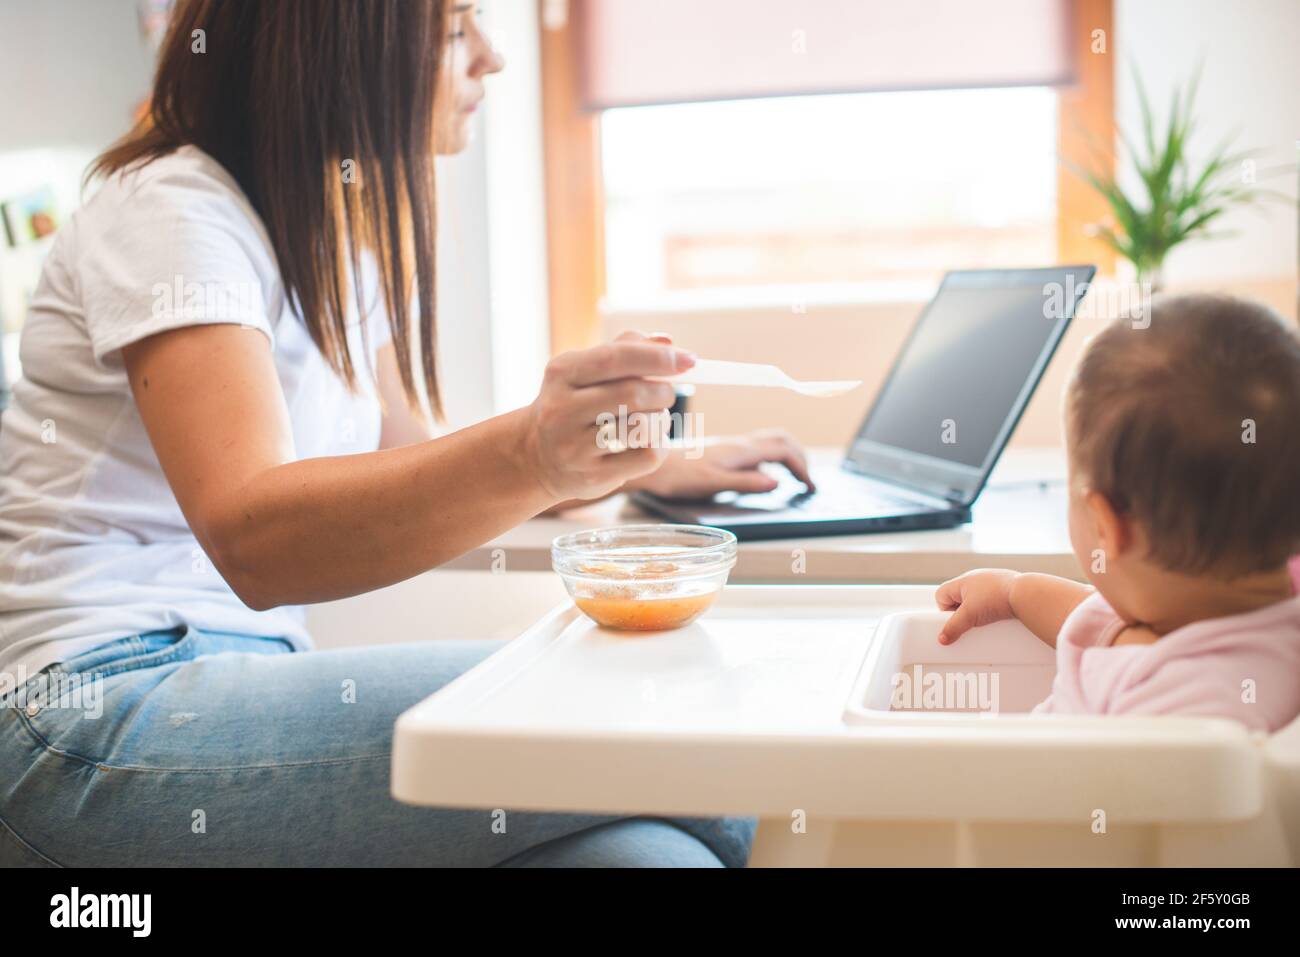 Mother feed her little daughter with a spoon and search on internet food recipes Stock Photo